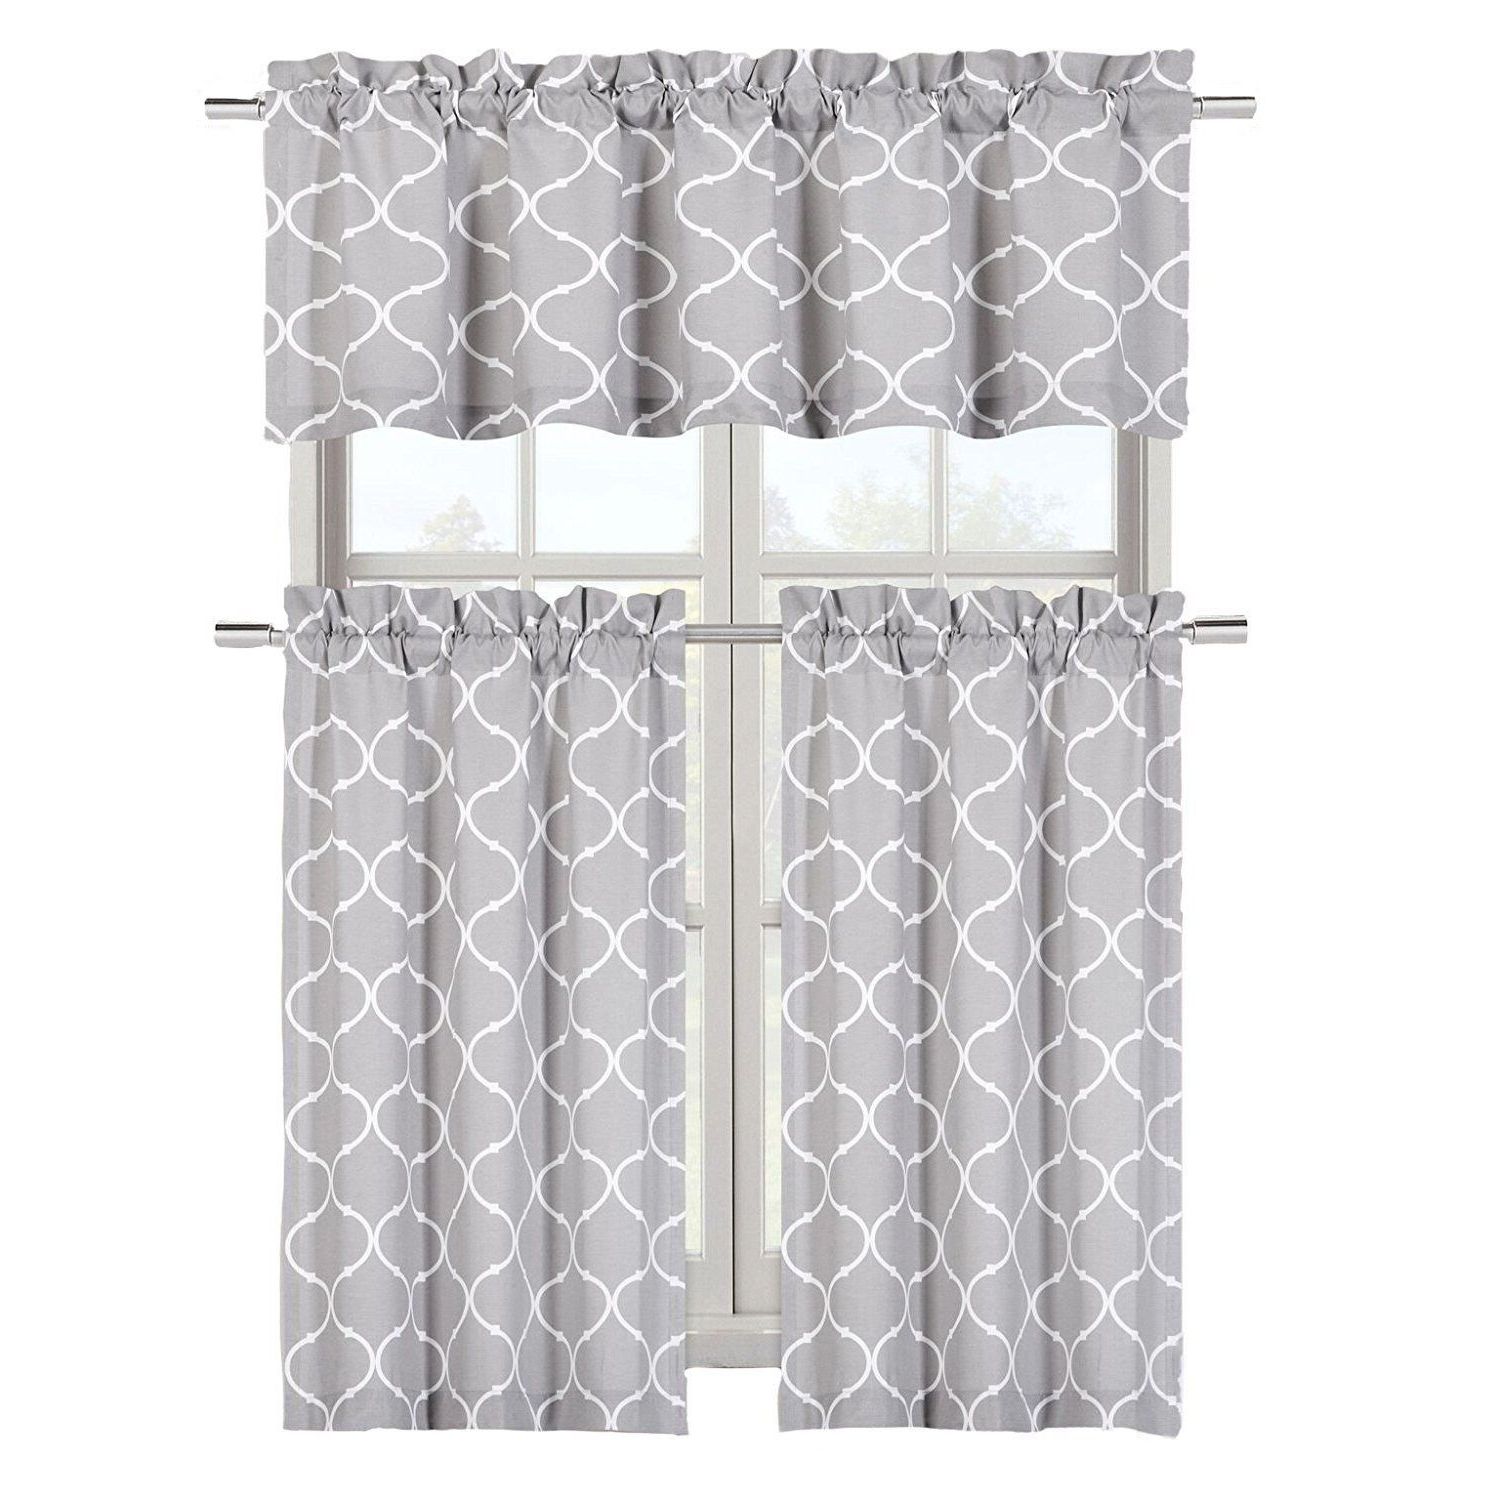 Well Known Cotton Blend Grey Kitchen Curtain Tiers Pertaining To Maison Shabby Gray Trellis Cotton Blend Kitchen Curtain Tier (View 11 of 20)